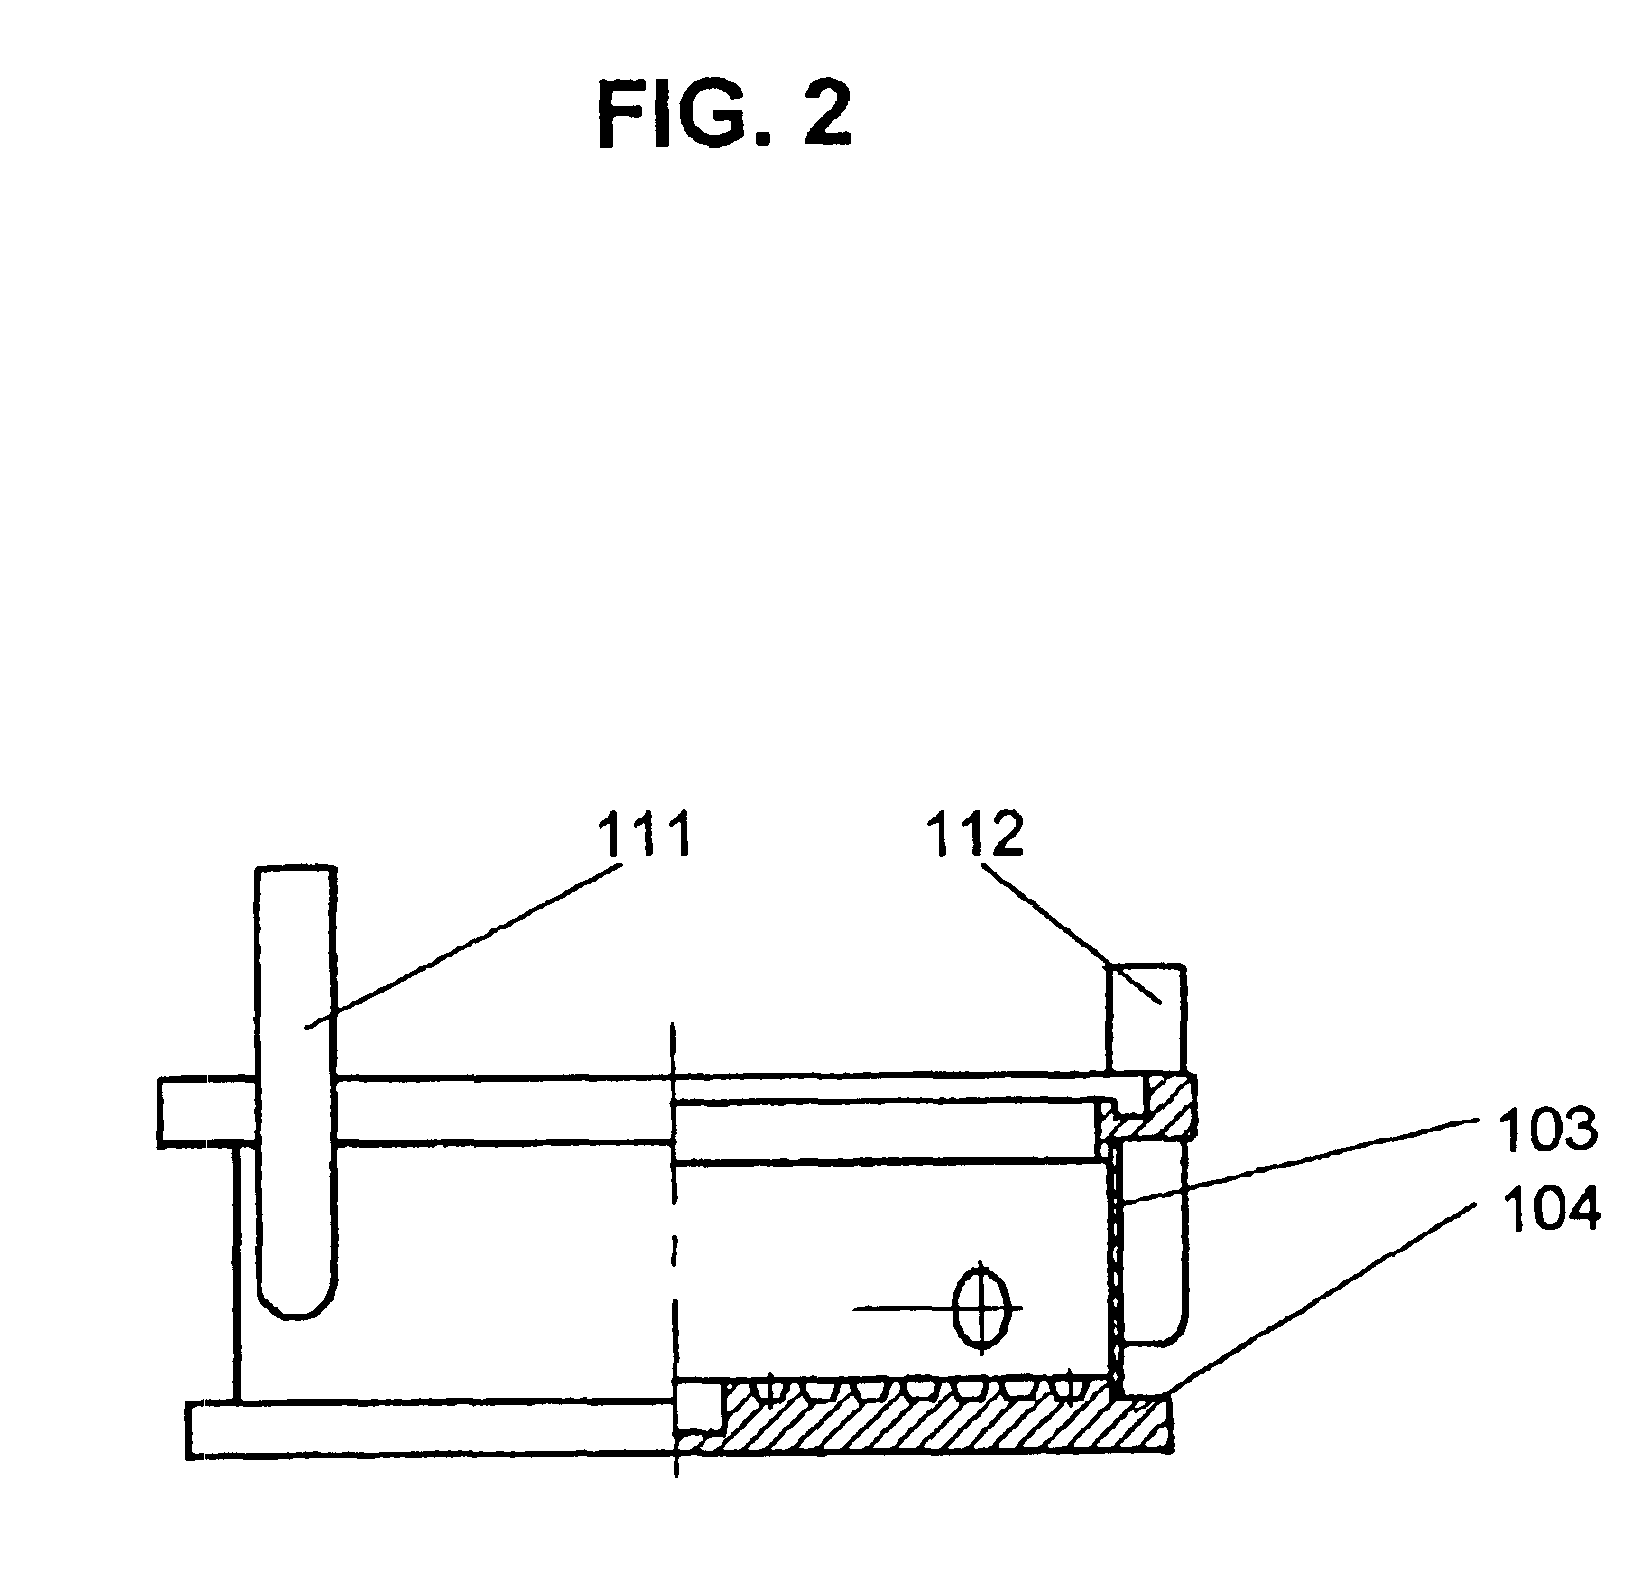 Integrated fluid cooling system for electronic components